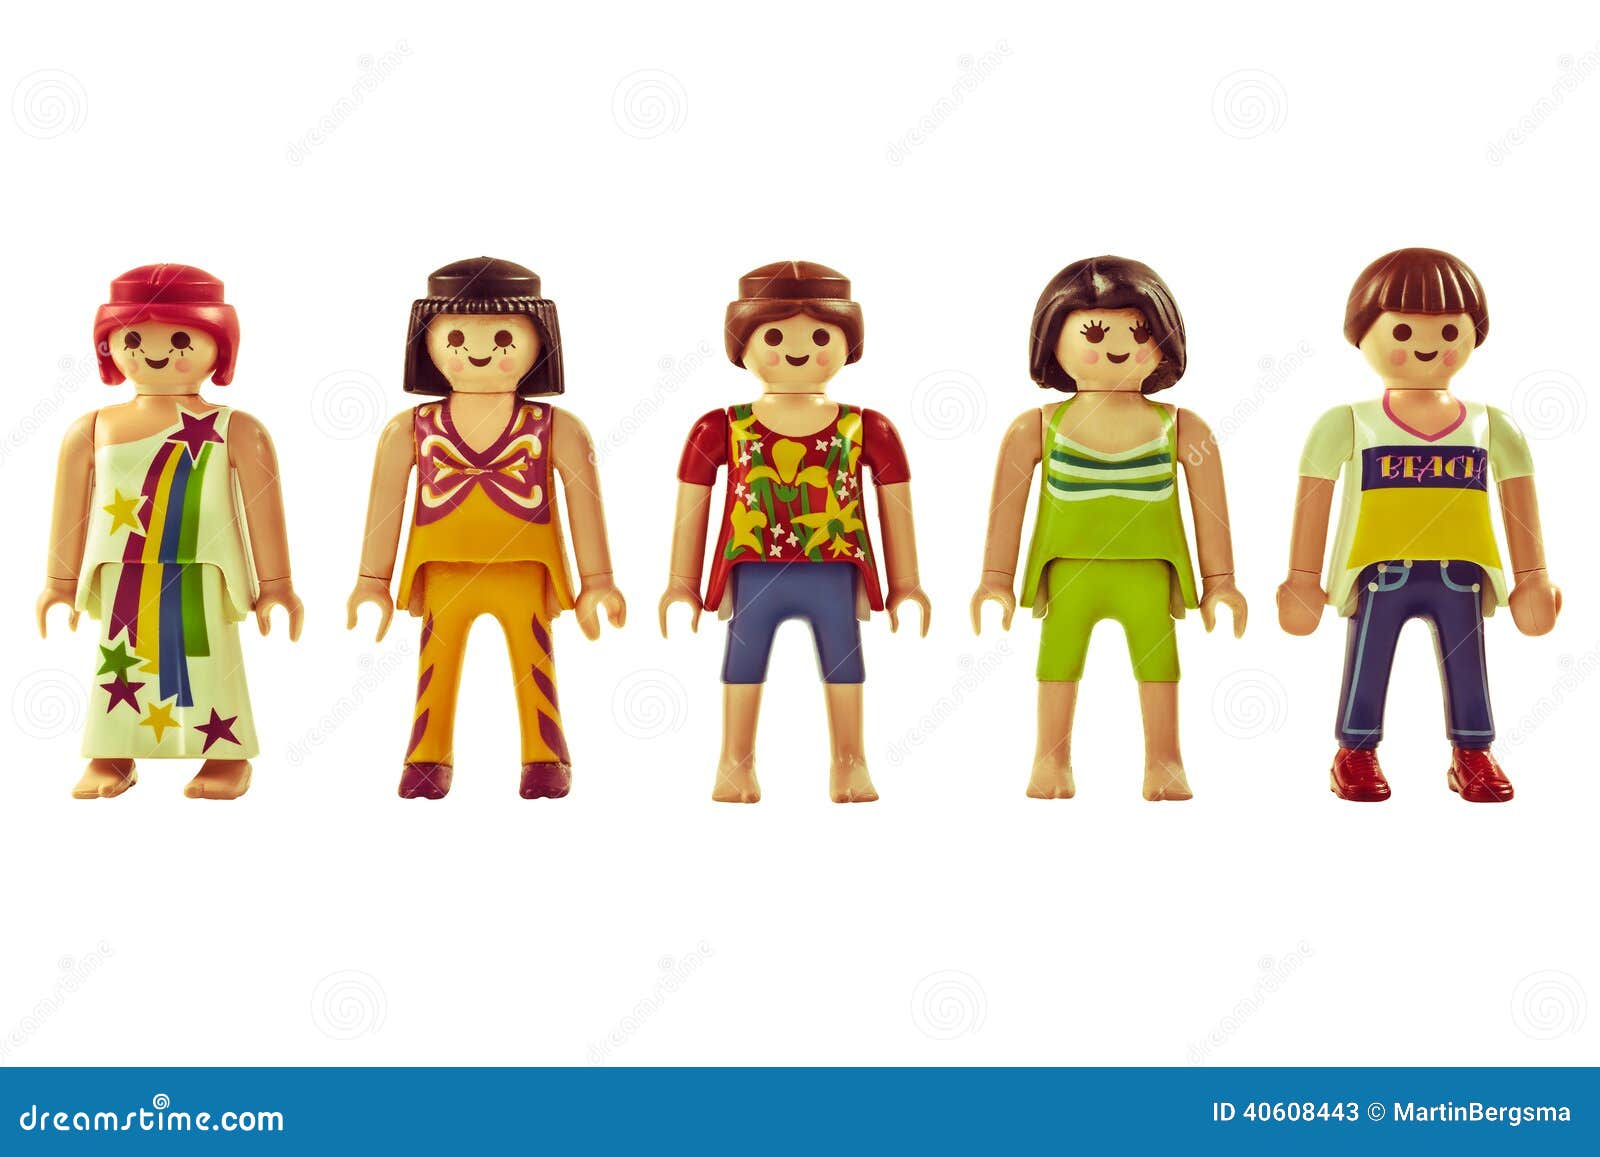 Playmobil Man Photos - Free & Royalty-Free Stock Photos from Dreamstime